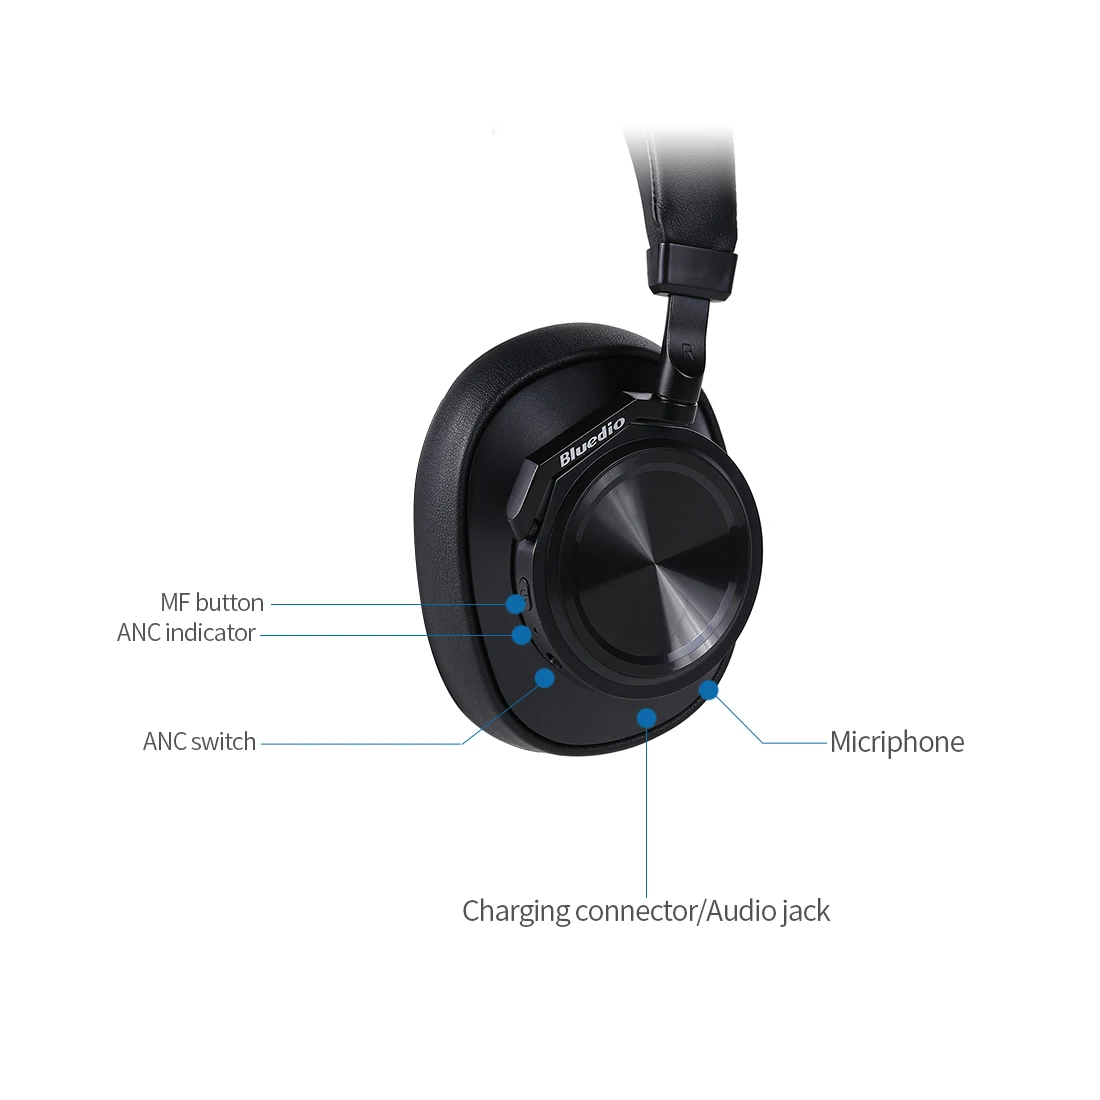 Bluedio T6 ANC Active Deep Noise Reduction Wireless Bluetooth 5.0 Headphones Monitor Level Music Headset With Microphone